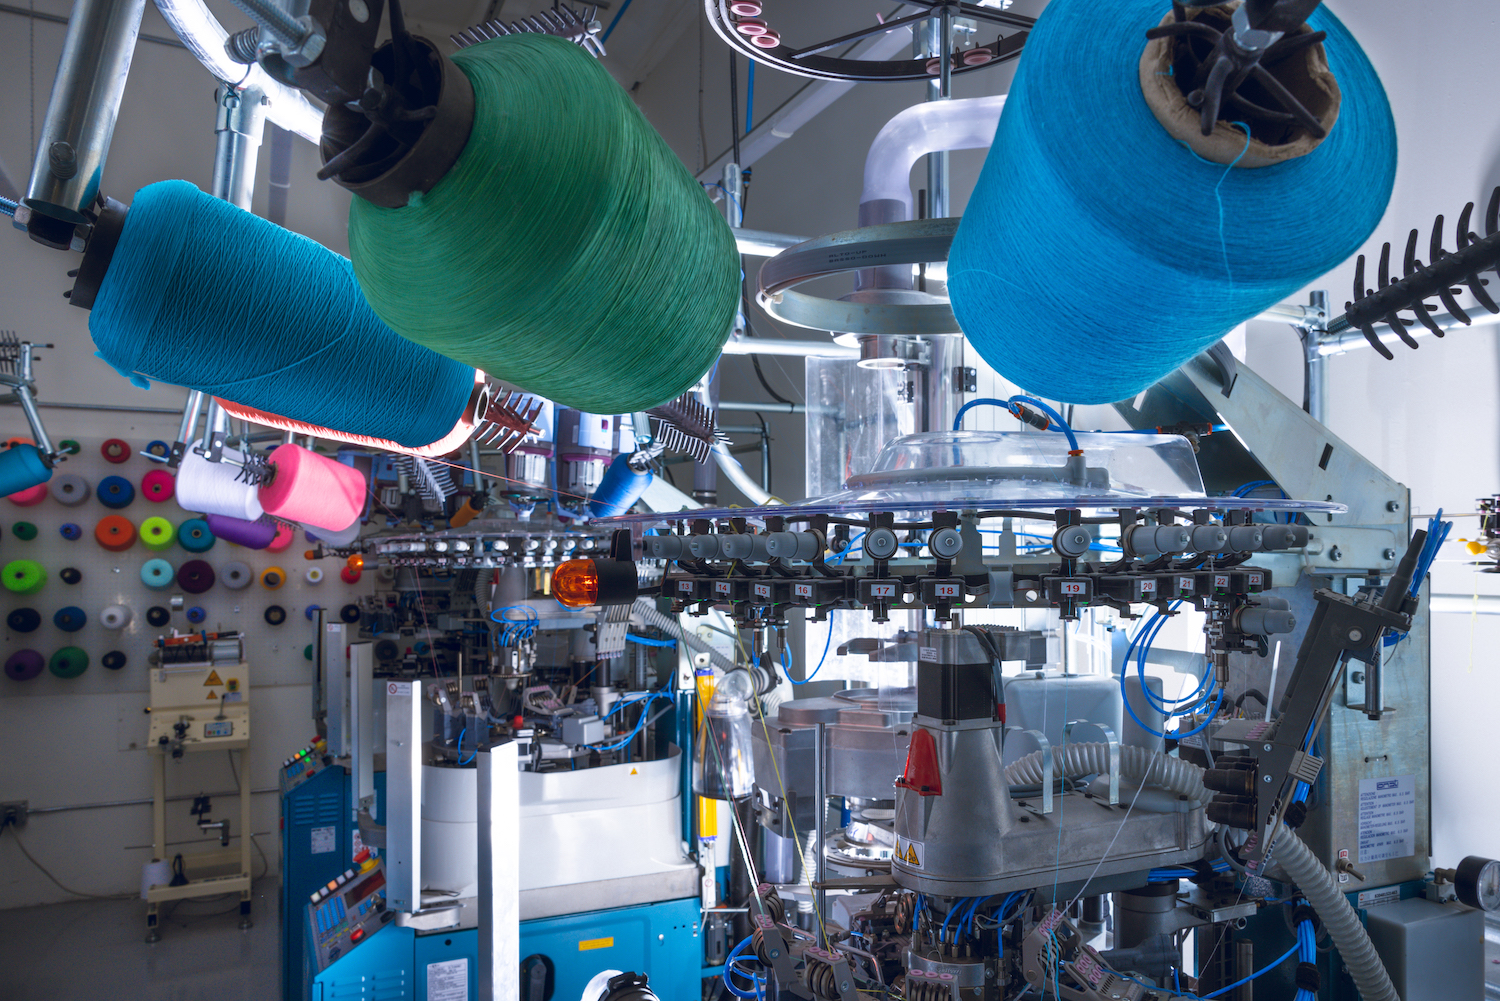 Knitting machines in action at the new factory in Oceanside, CA. © FutureStitch